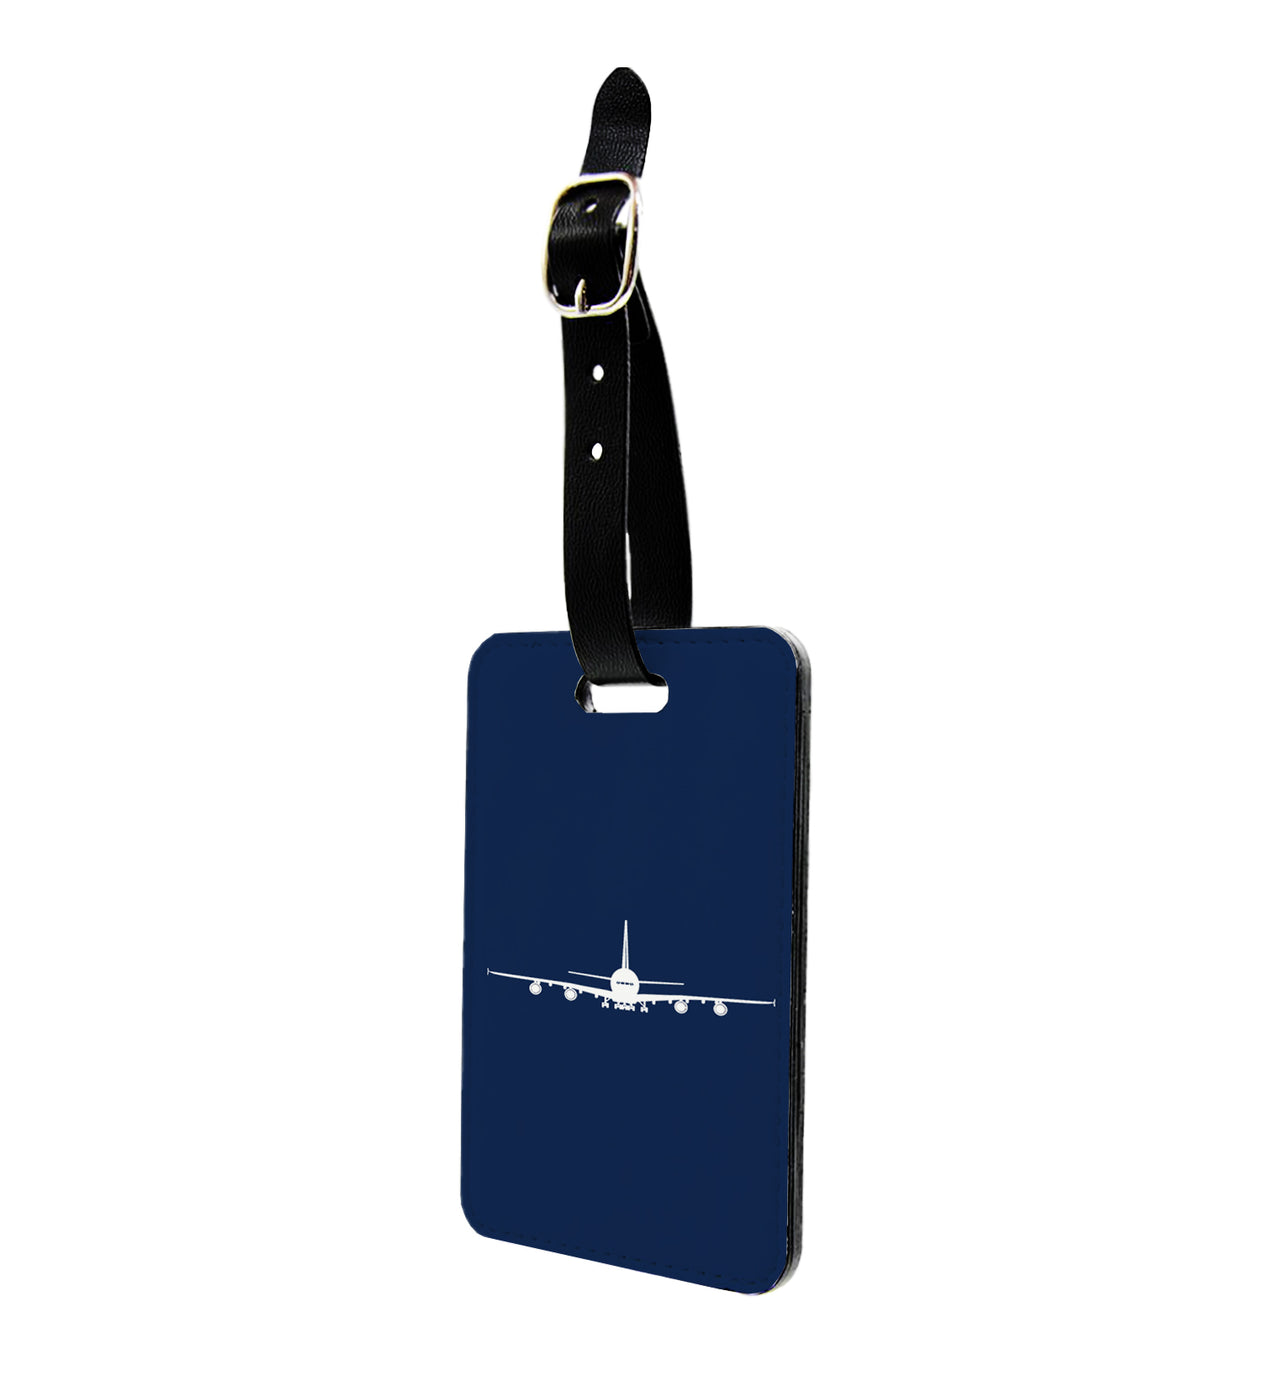 Airbus A380 Silhouette Designed Luggage Tag